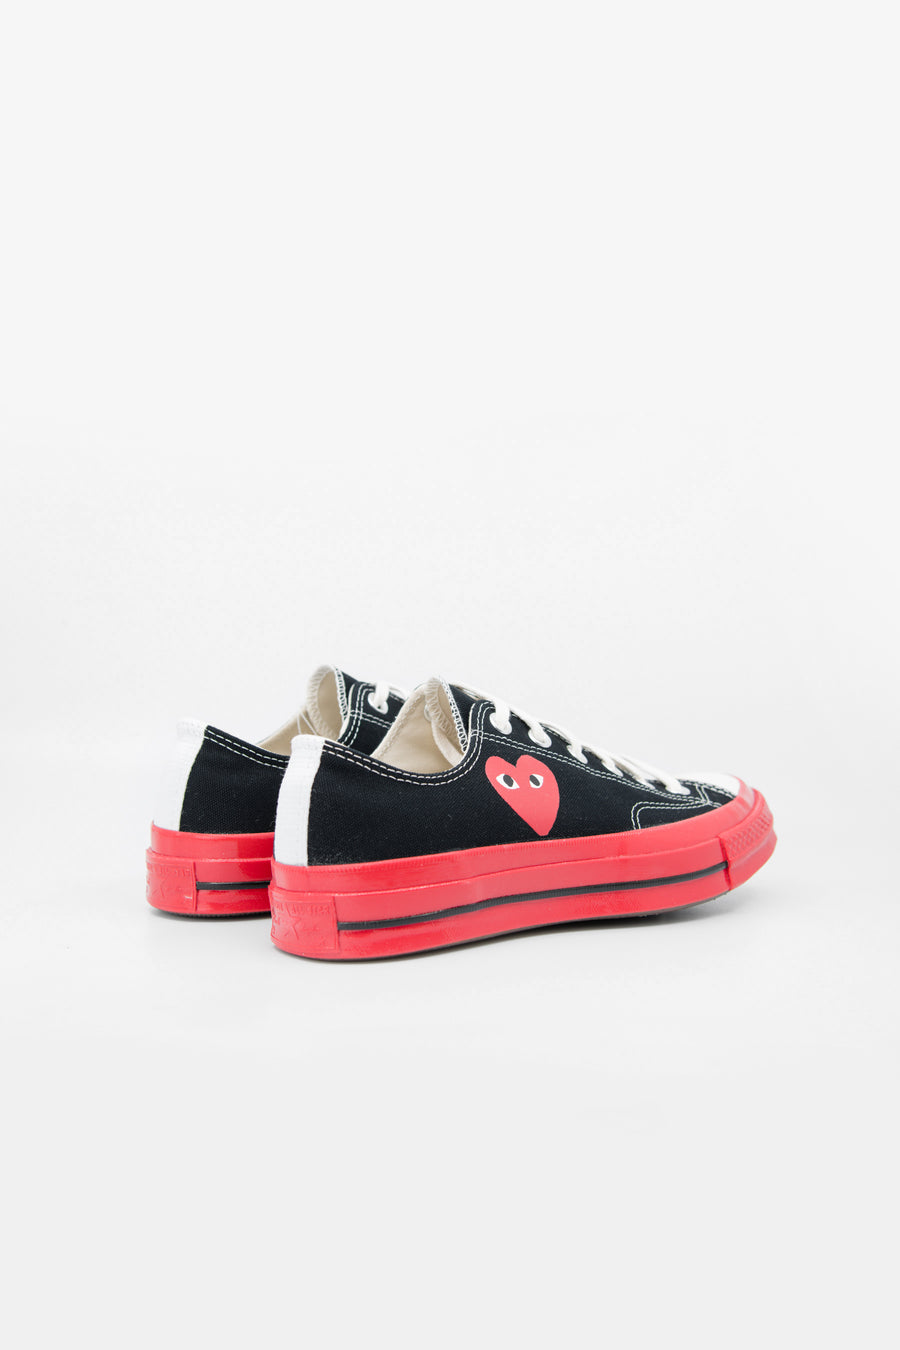 PLAY Red Sole Chuck Taylor Low Black K123-001-1